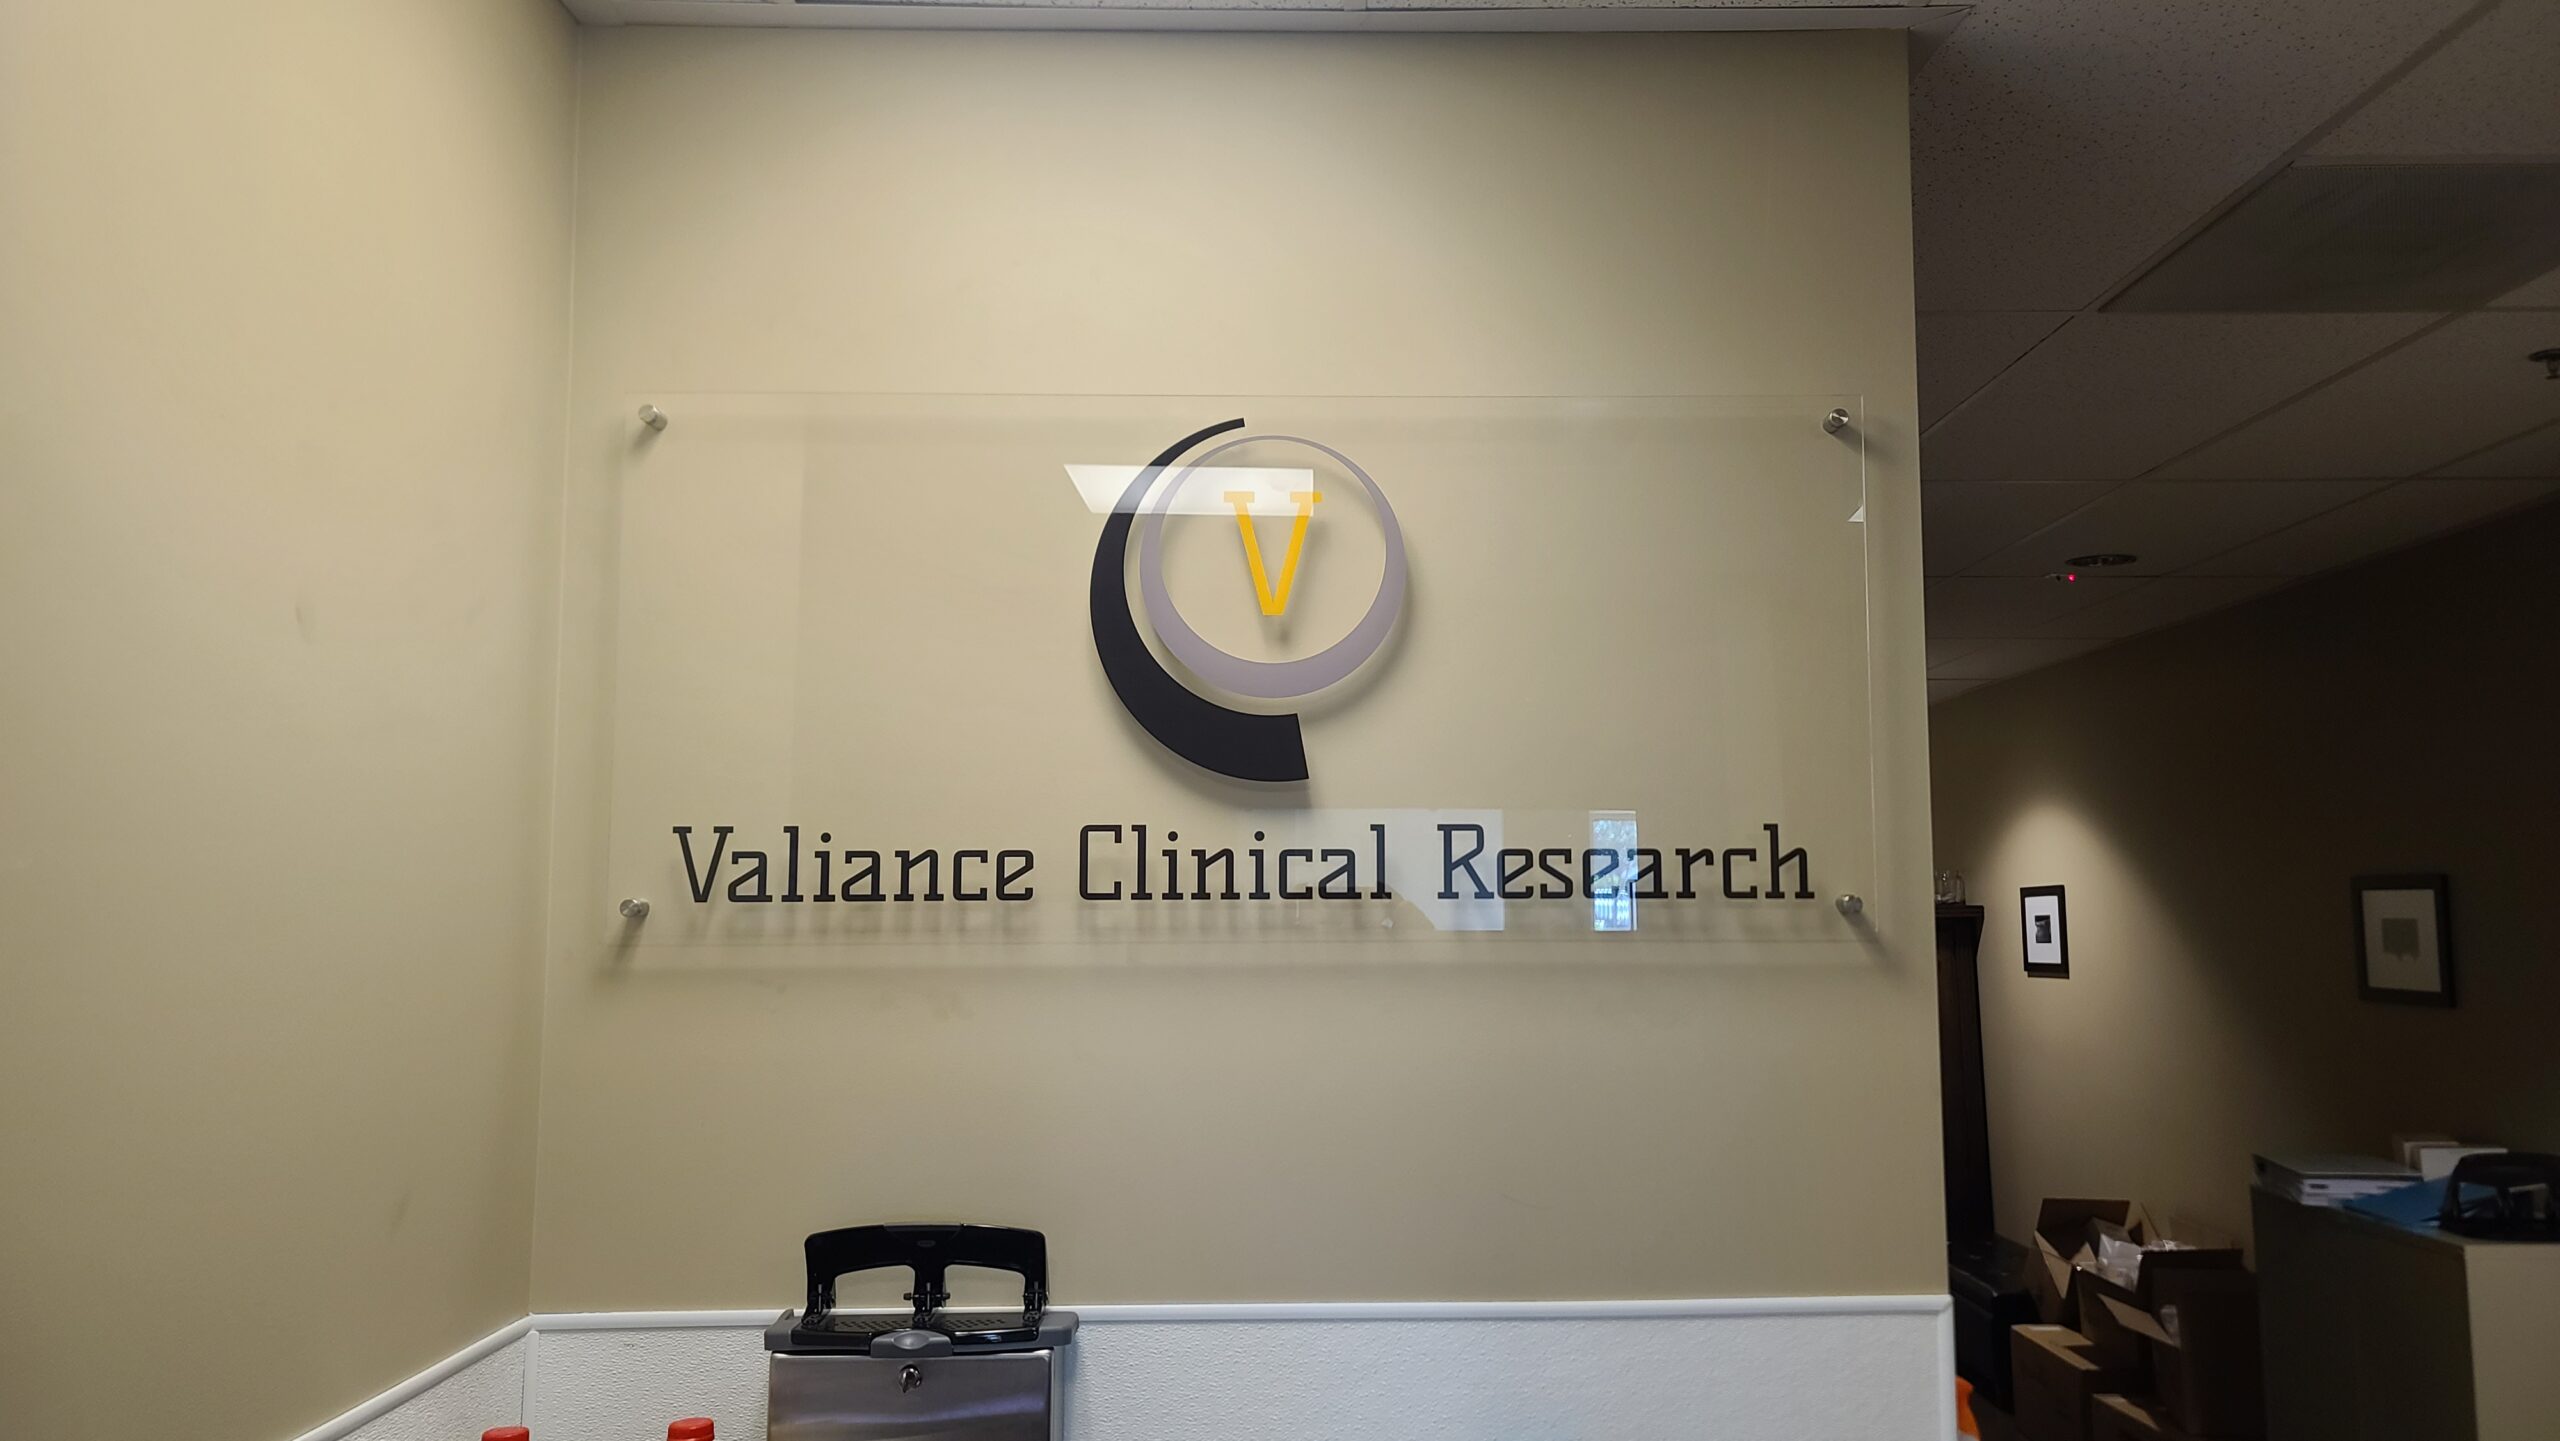 You are currently viewing Acrylic Lobby Sign for Valiance Clinical Research in Tarzana